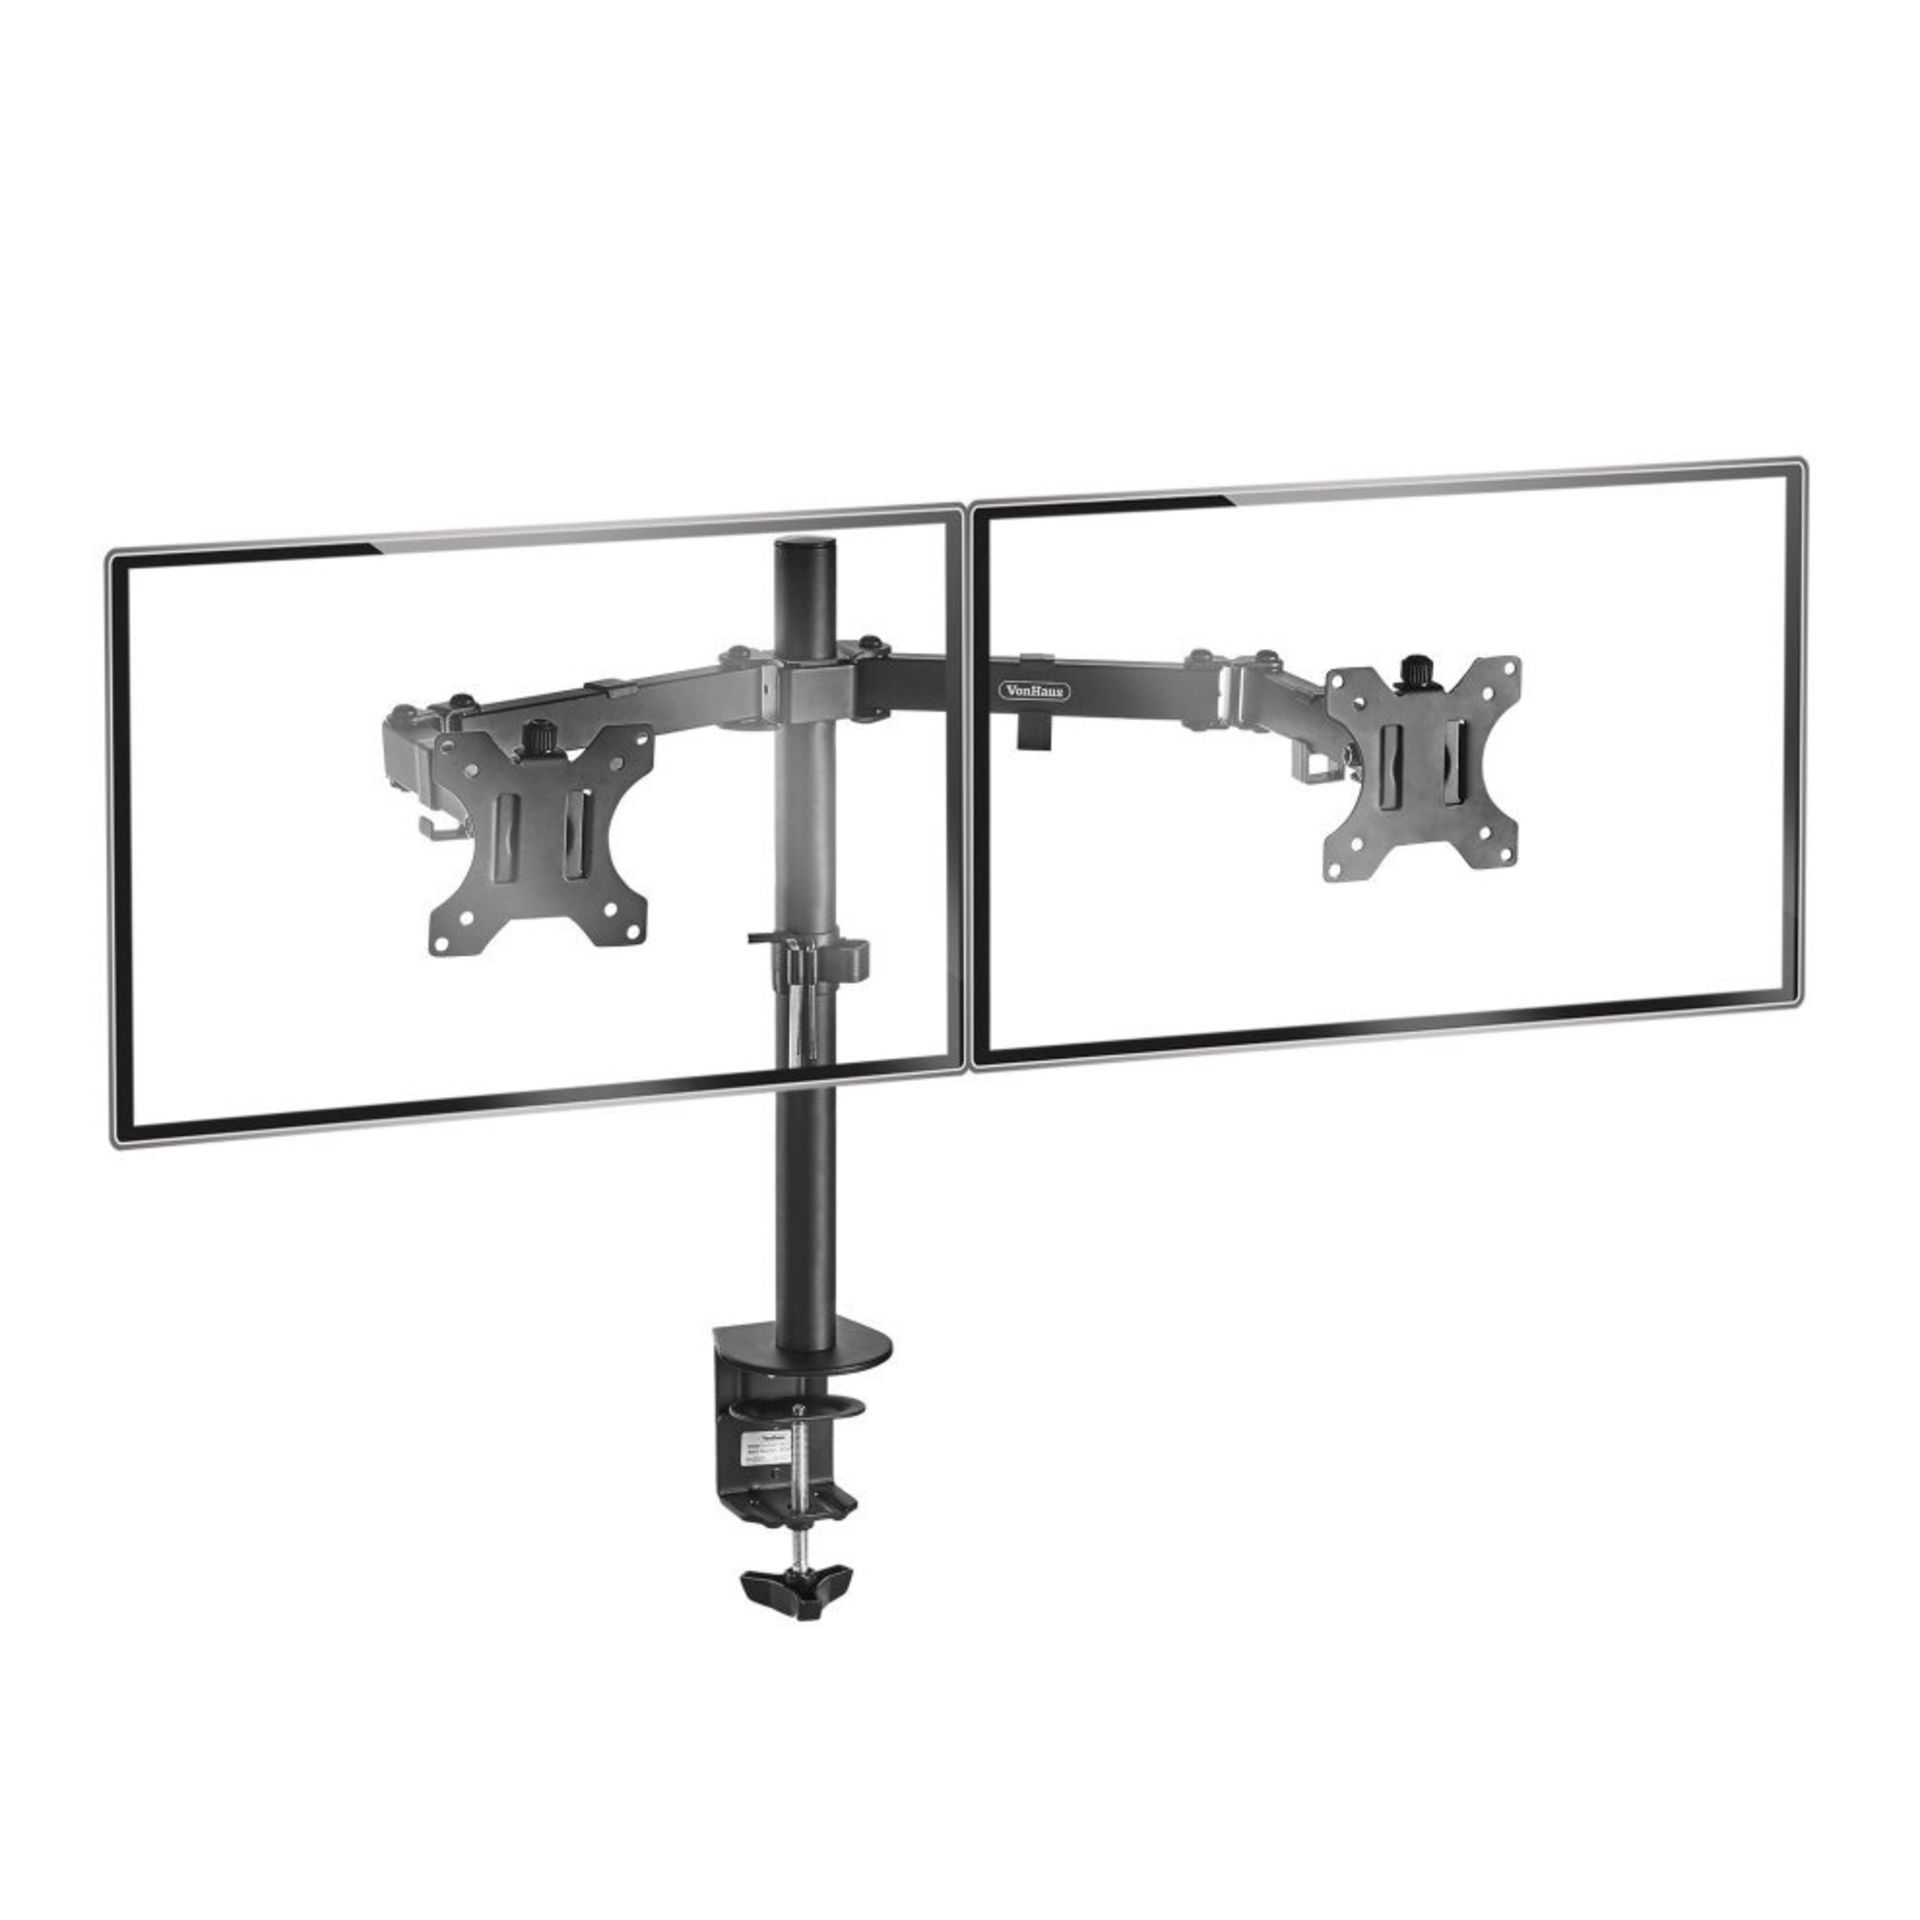 Dual Arm Desk Mount with Clamp - ER34